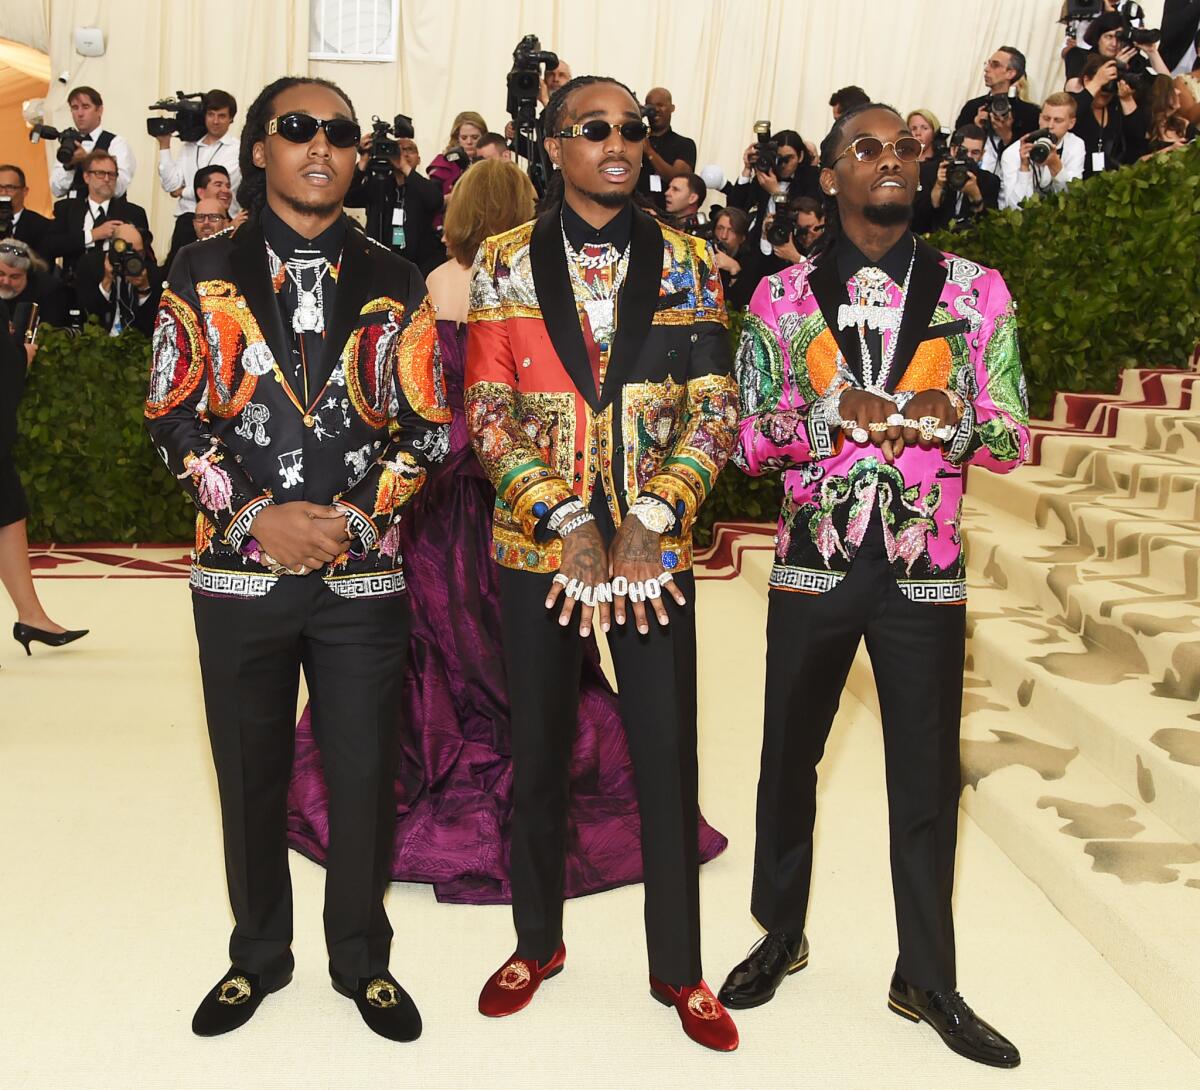 Takeoff, from left, Quavo and Offset of Migos at the 2018 Met Gala in New York City.